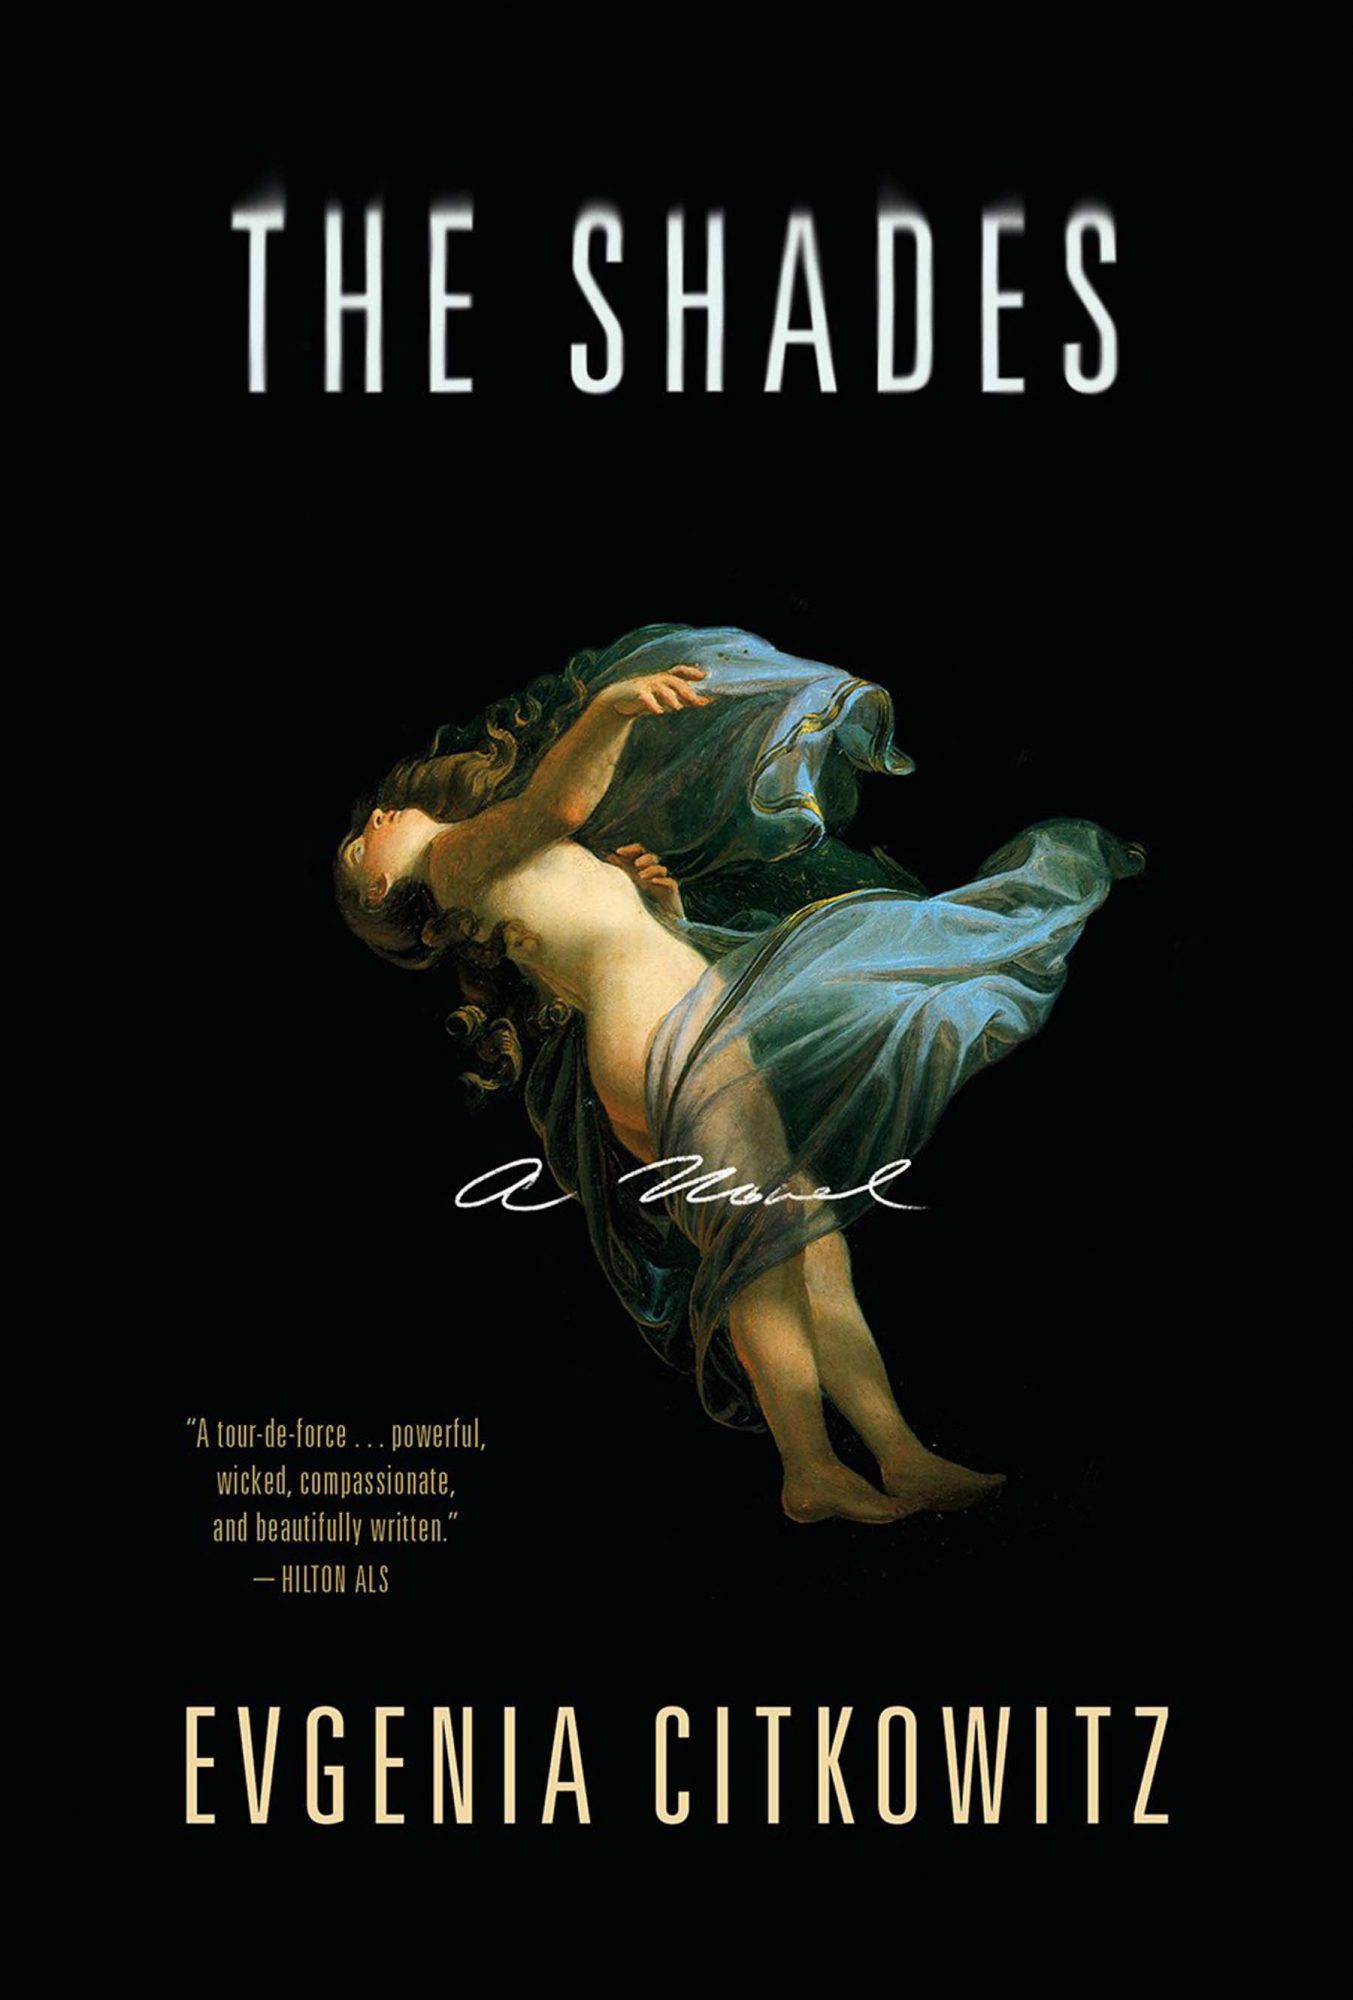 The Shades&nbsp;by Evgenia Citkowitz